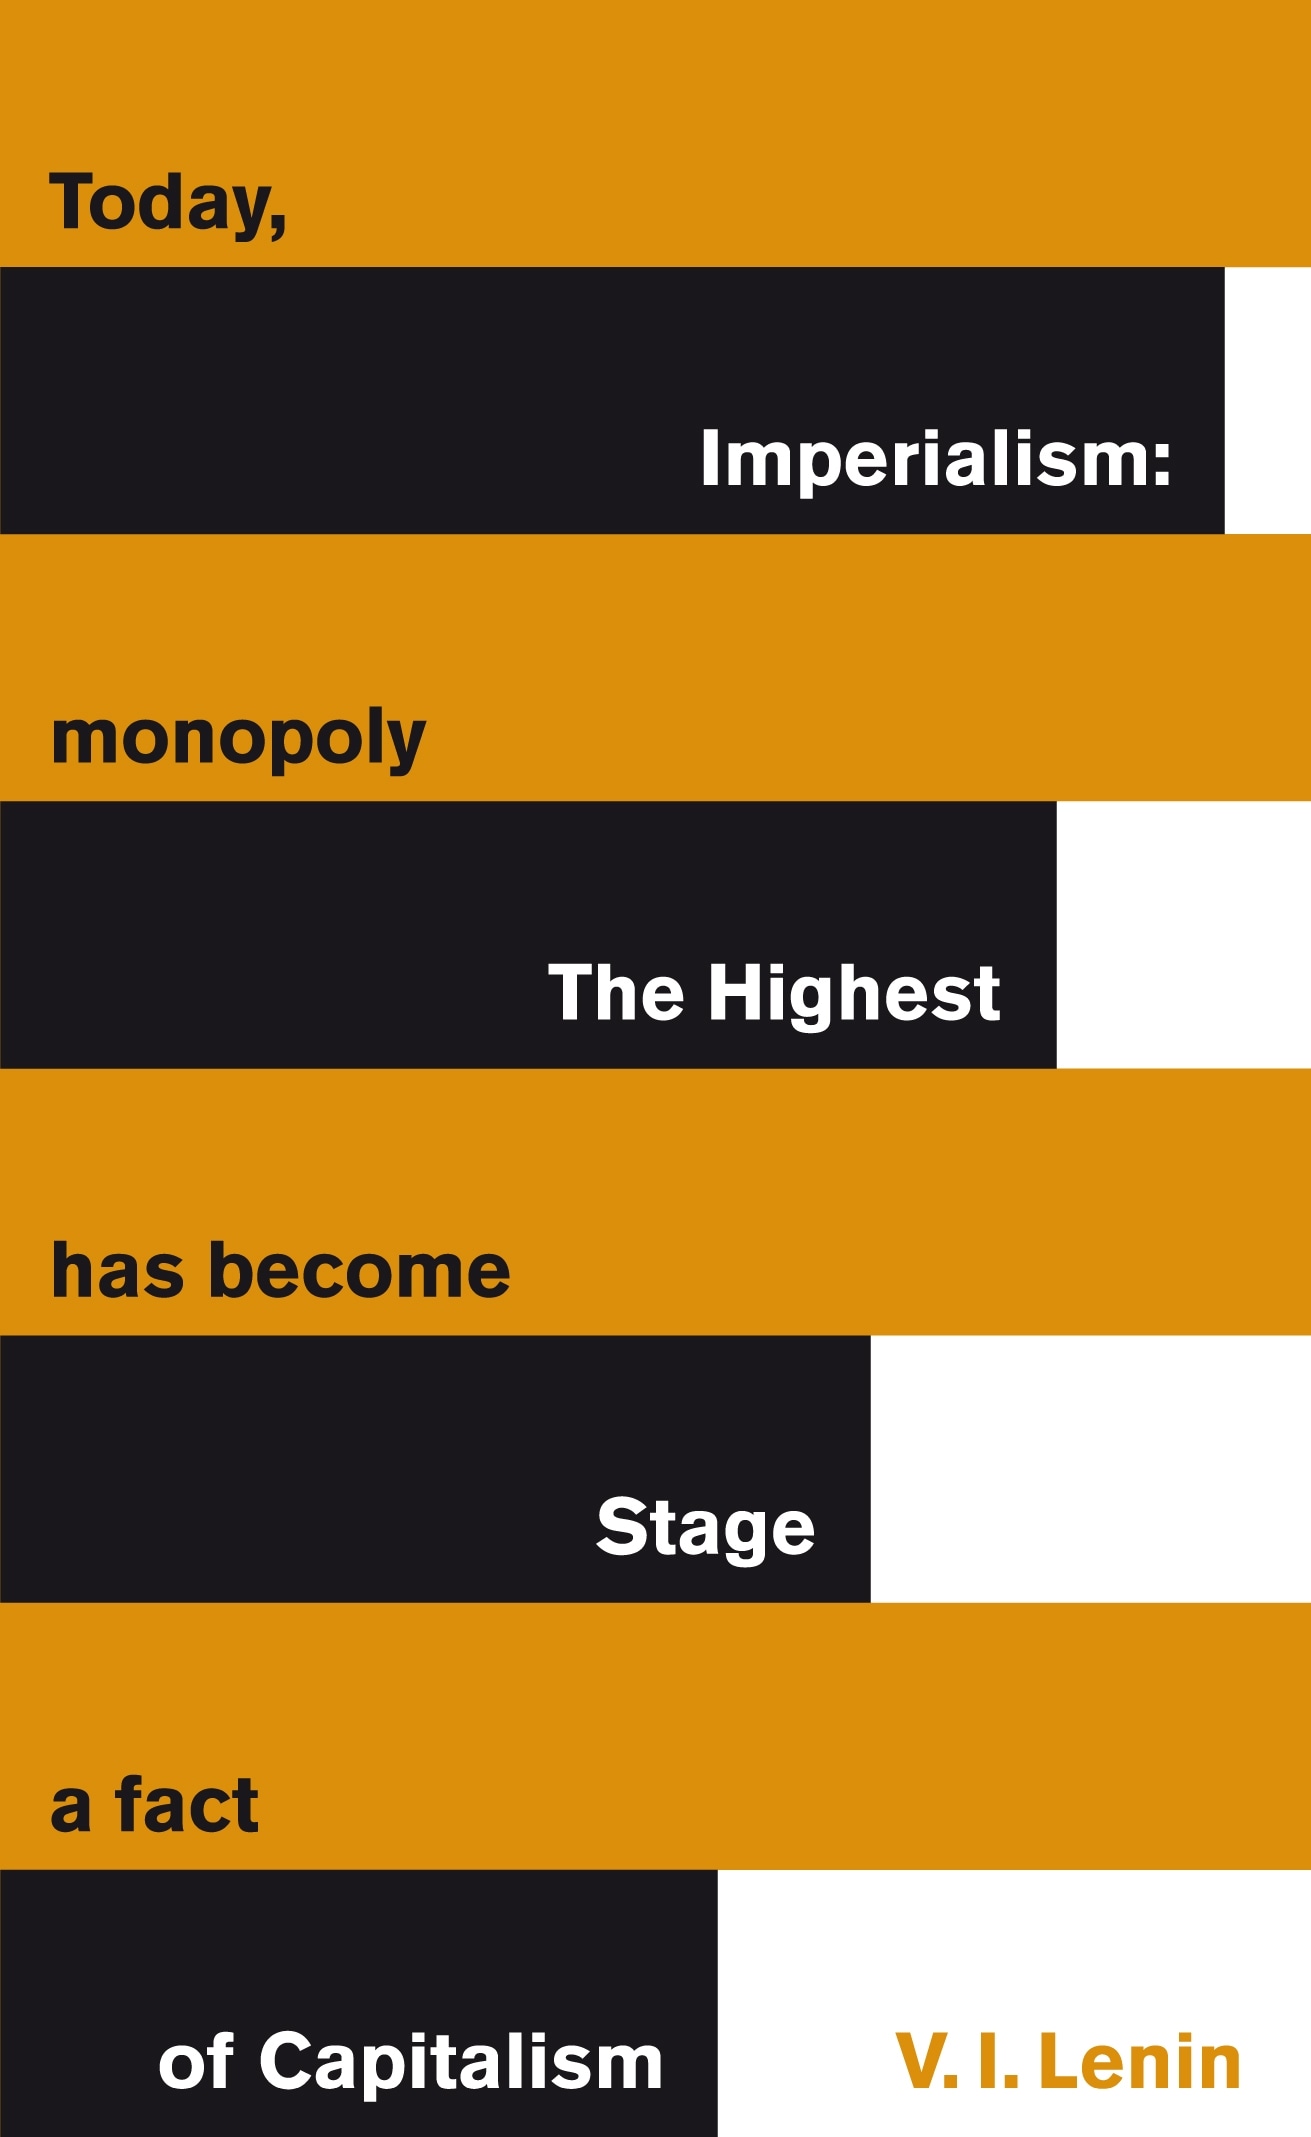 Book “Imperialism: The Highest Stage of Capitalism” by Vladimir Lenin — August 26, 2010